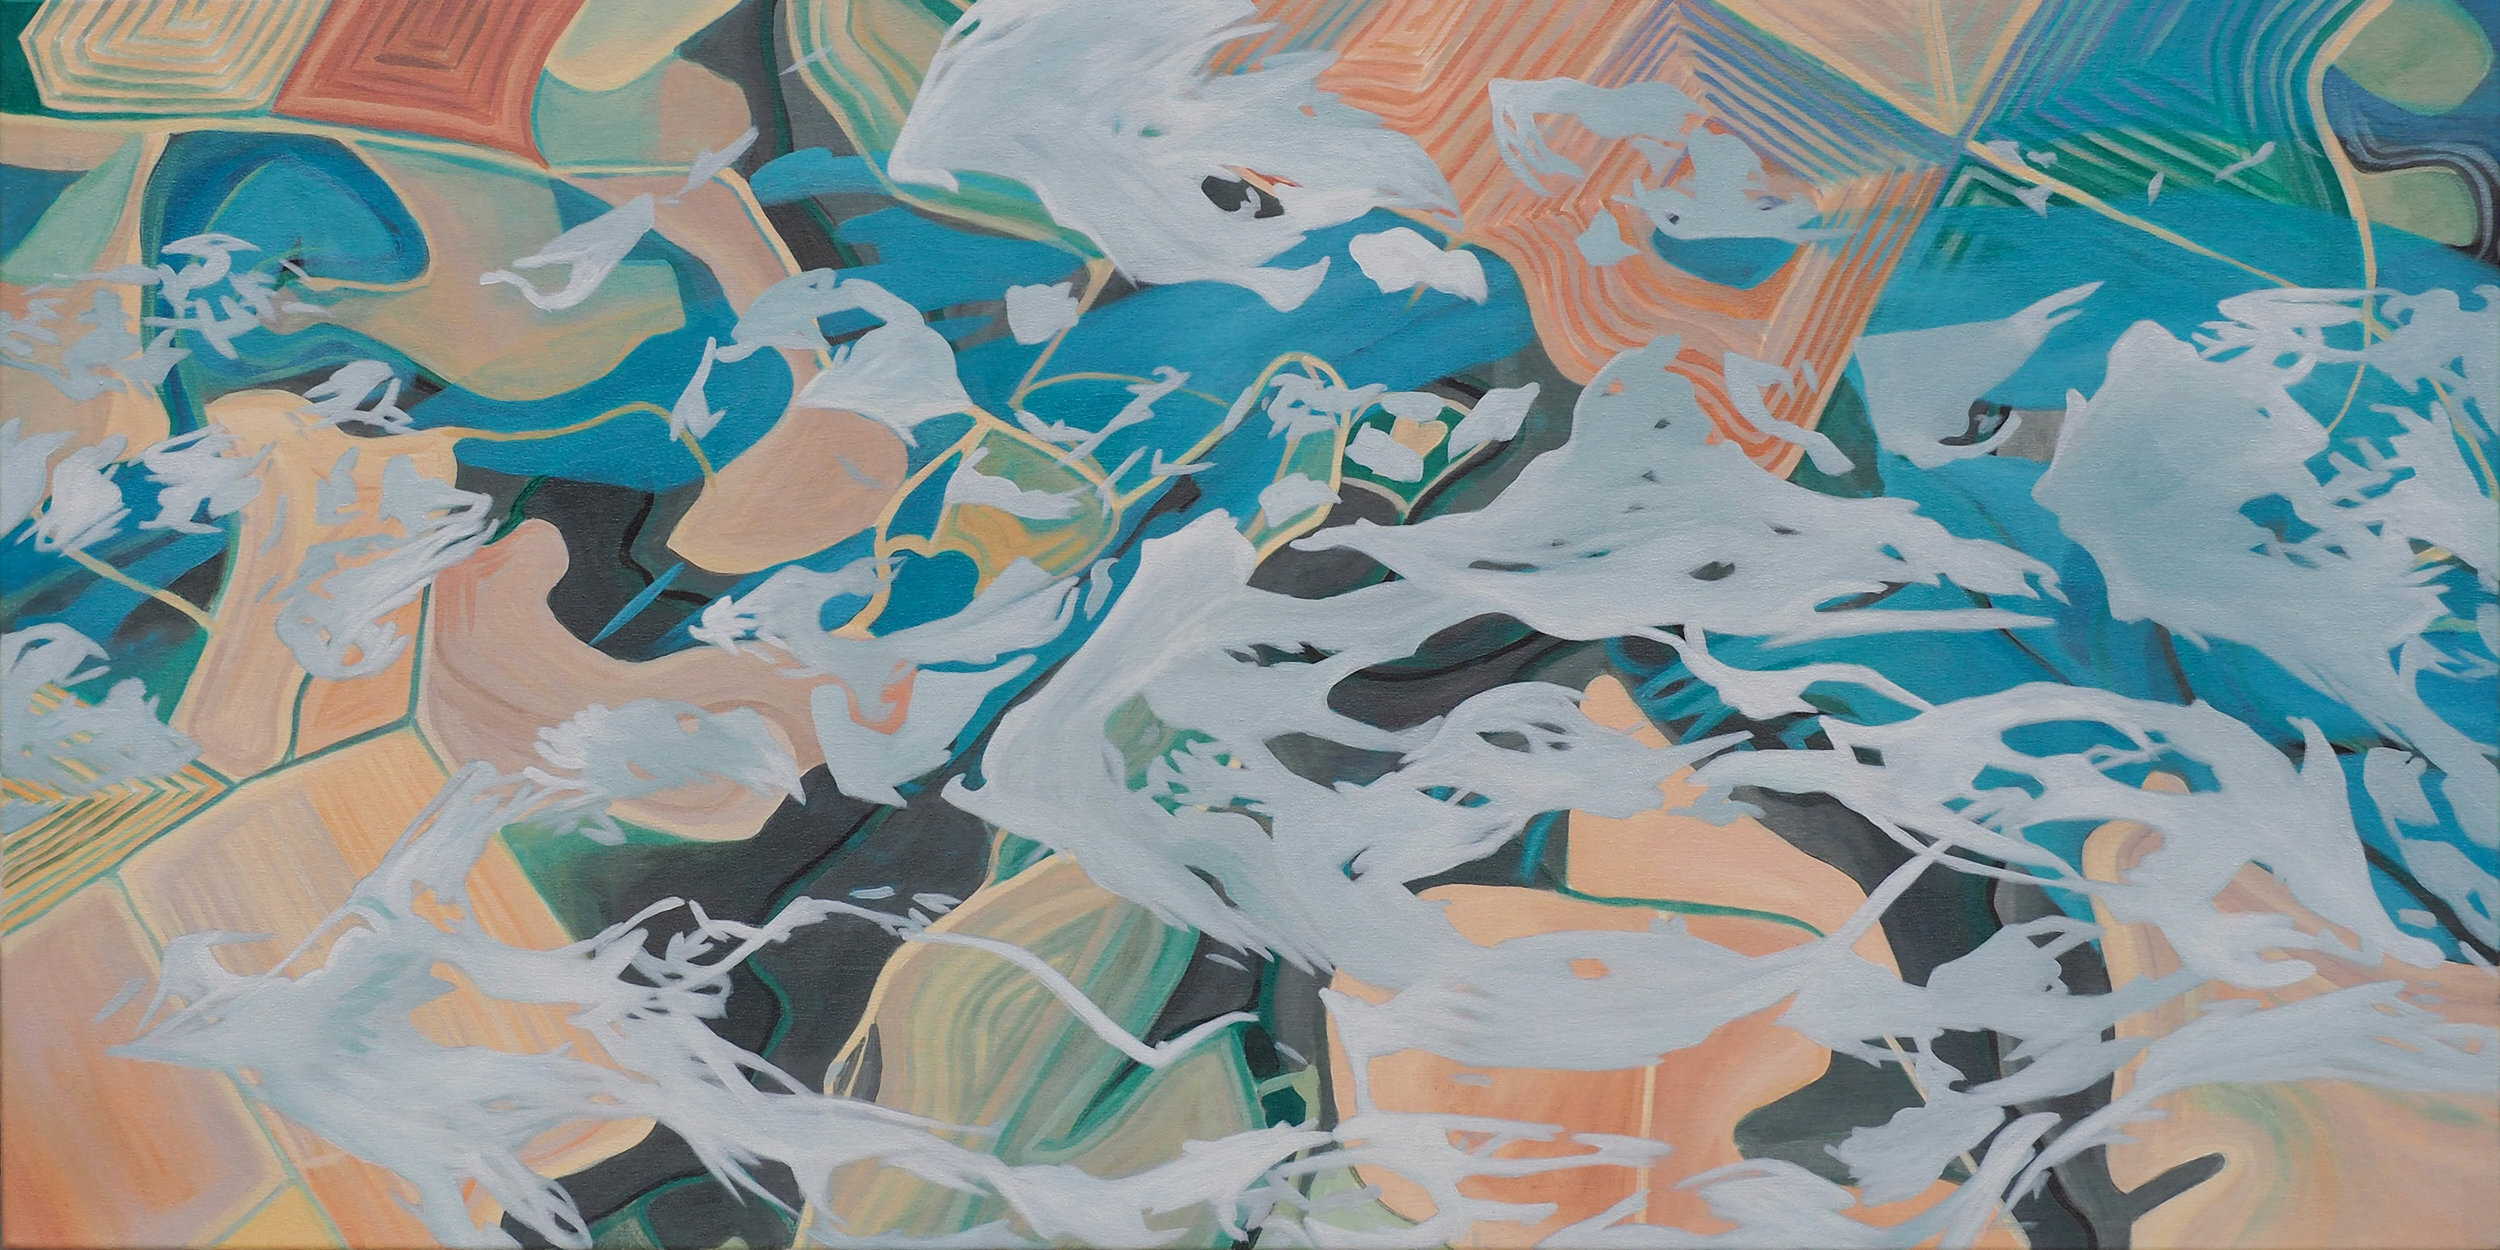  Tossed, 24” x 48”, acrylic on canvas, 2017   Sold  